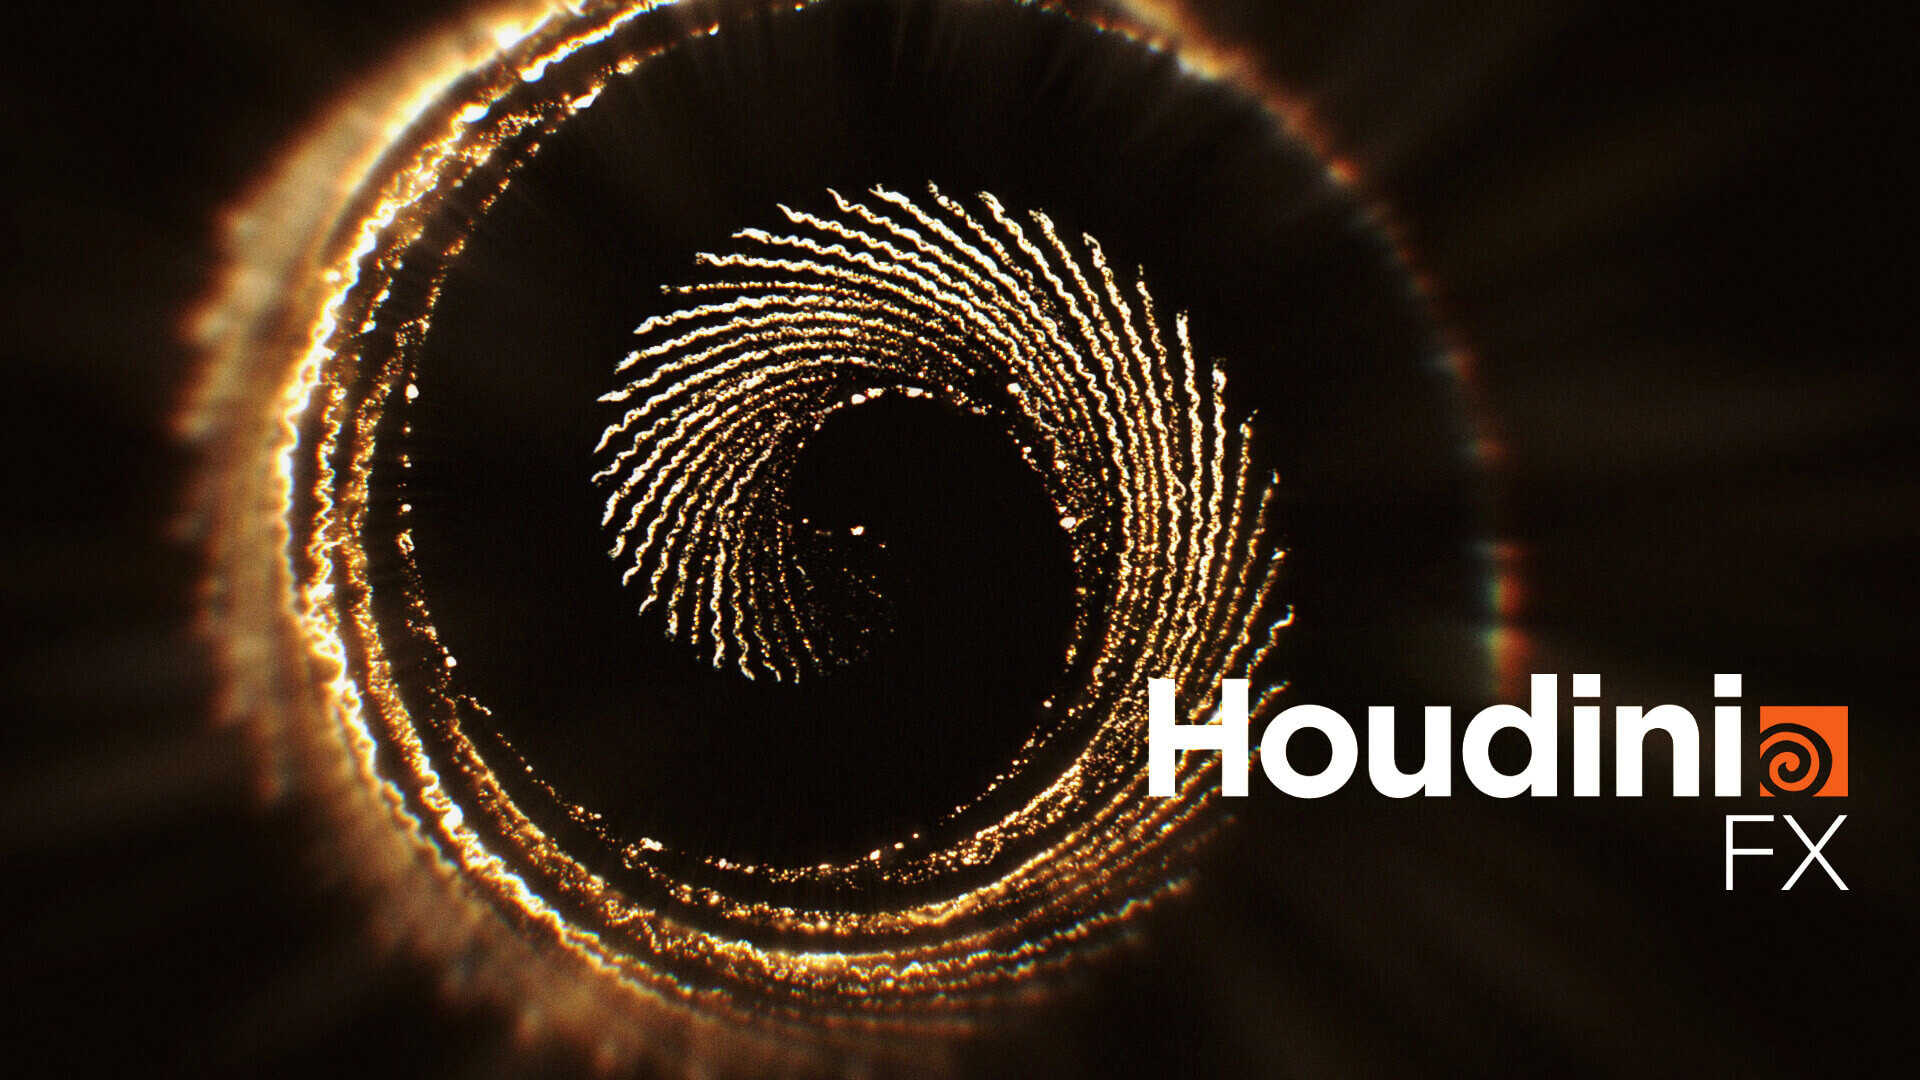 What is Houdini software